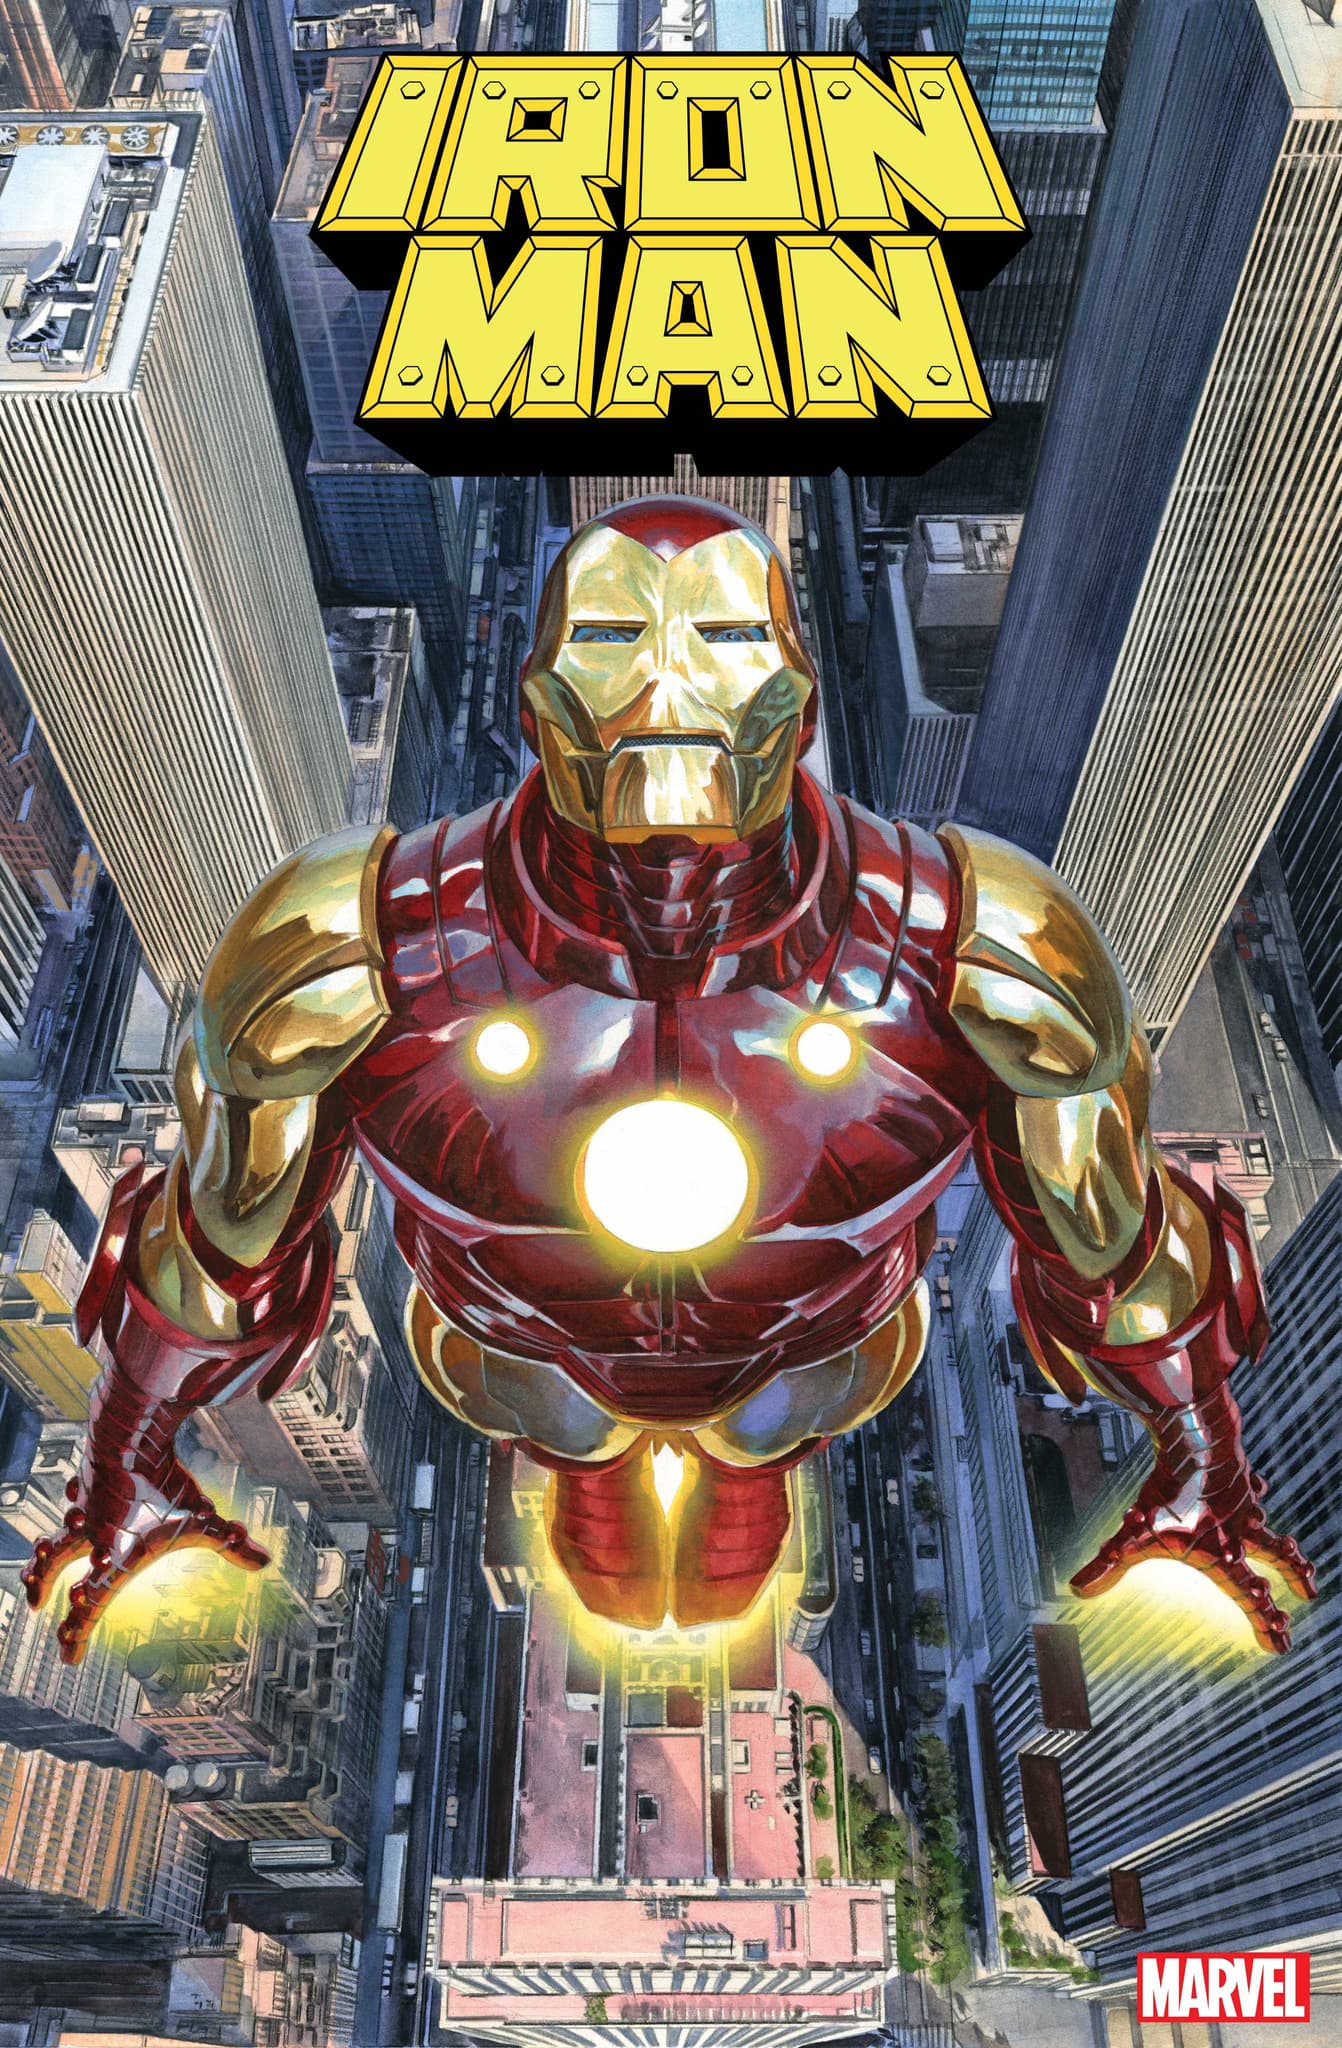 IRON MAN #25 cover by Alex Ross